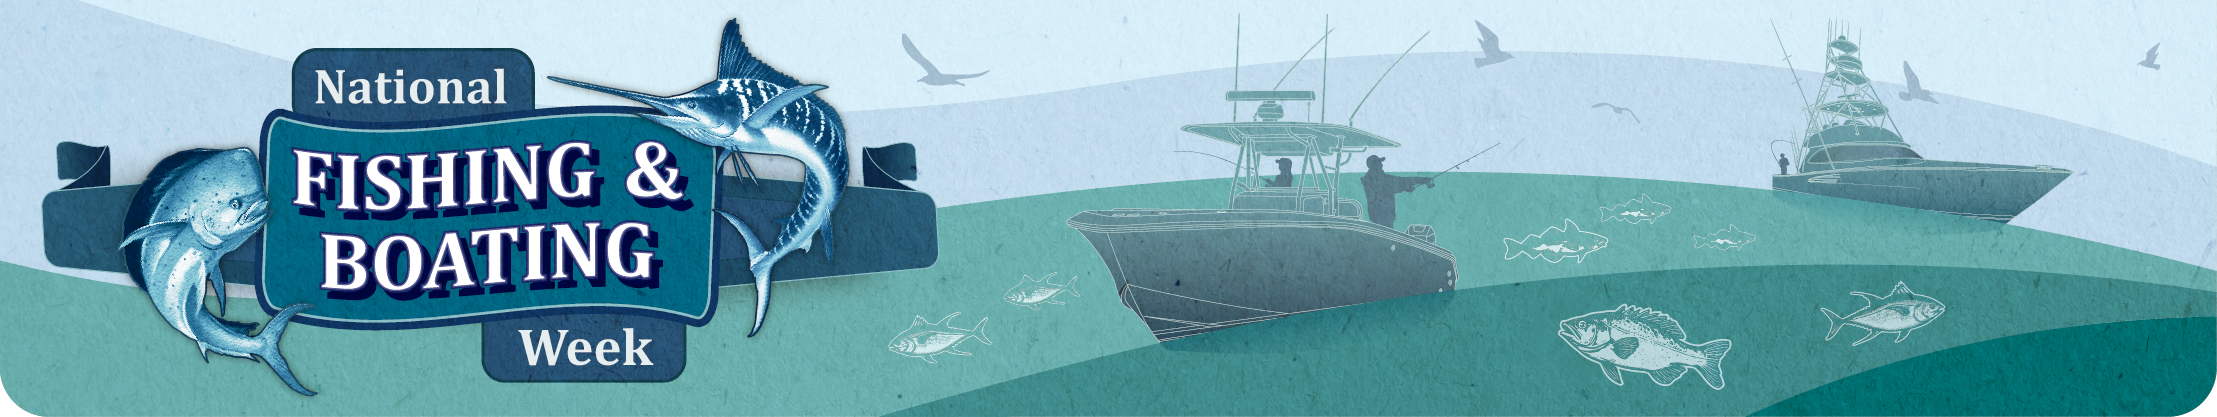 Banner image for National Fishing & Boating Week with illustrations of boats, fish, and seagulls in the background.